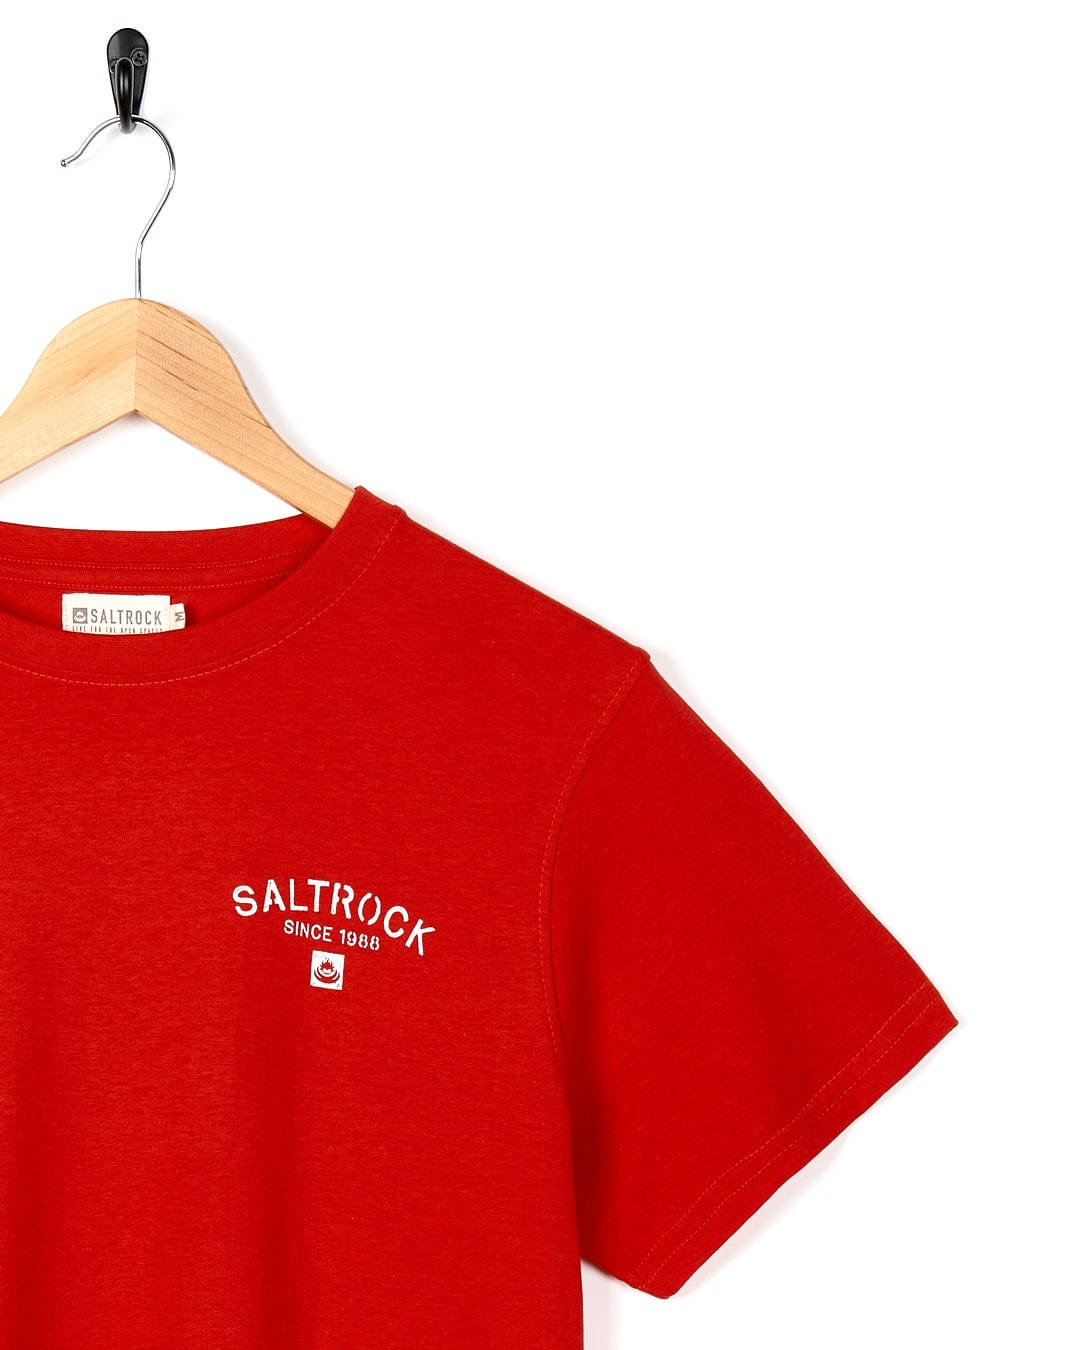 A Stencil - Mens Location T-Shirt - Saunton- Red with the brand name Saltrock on it.